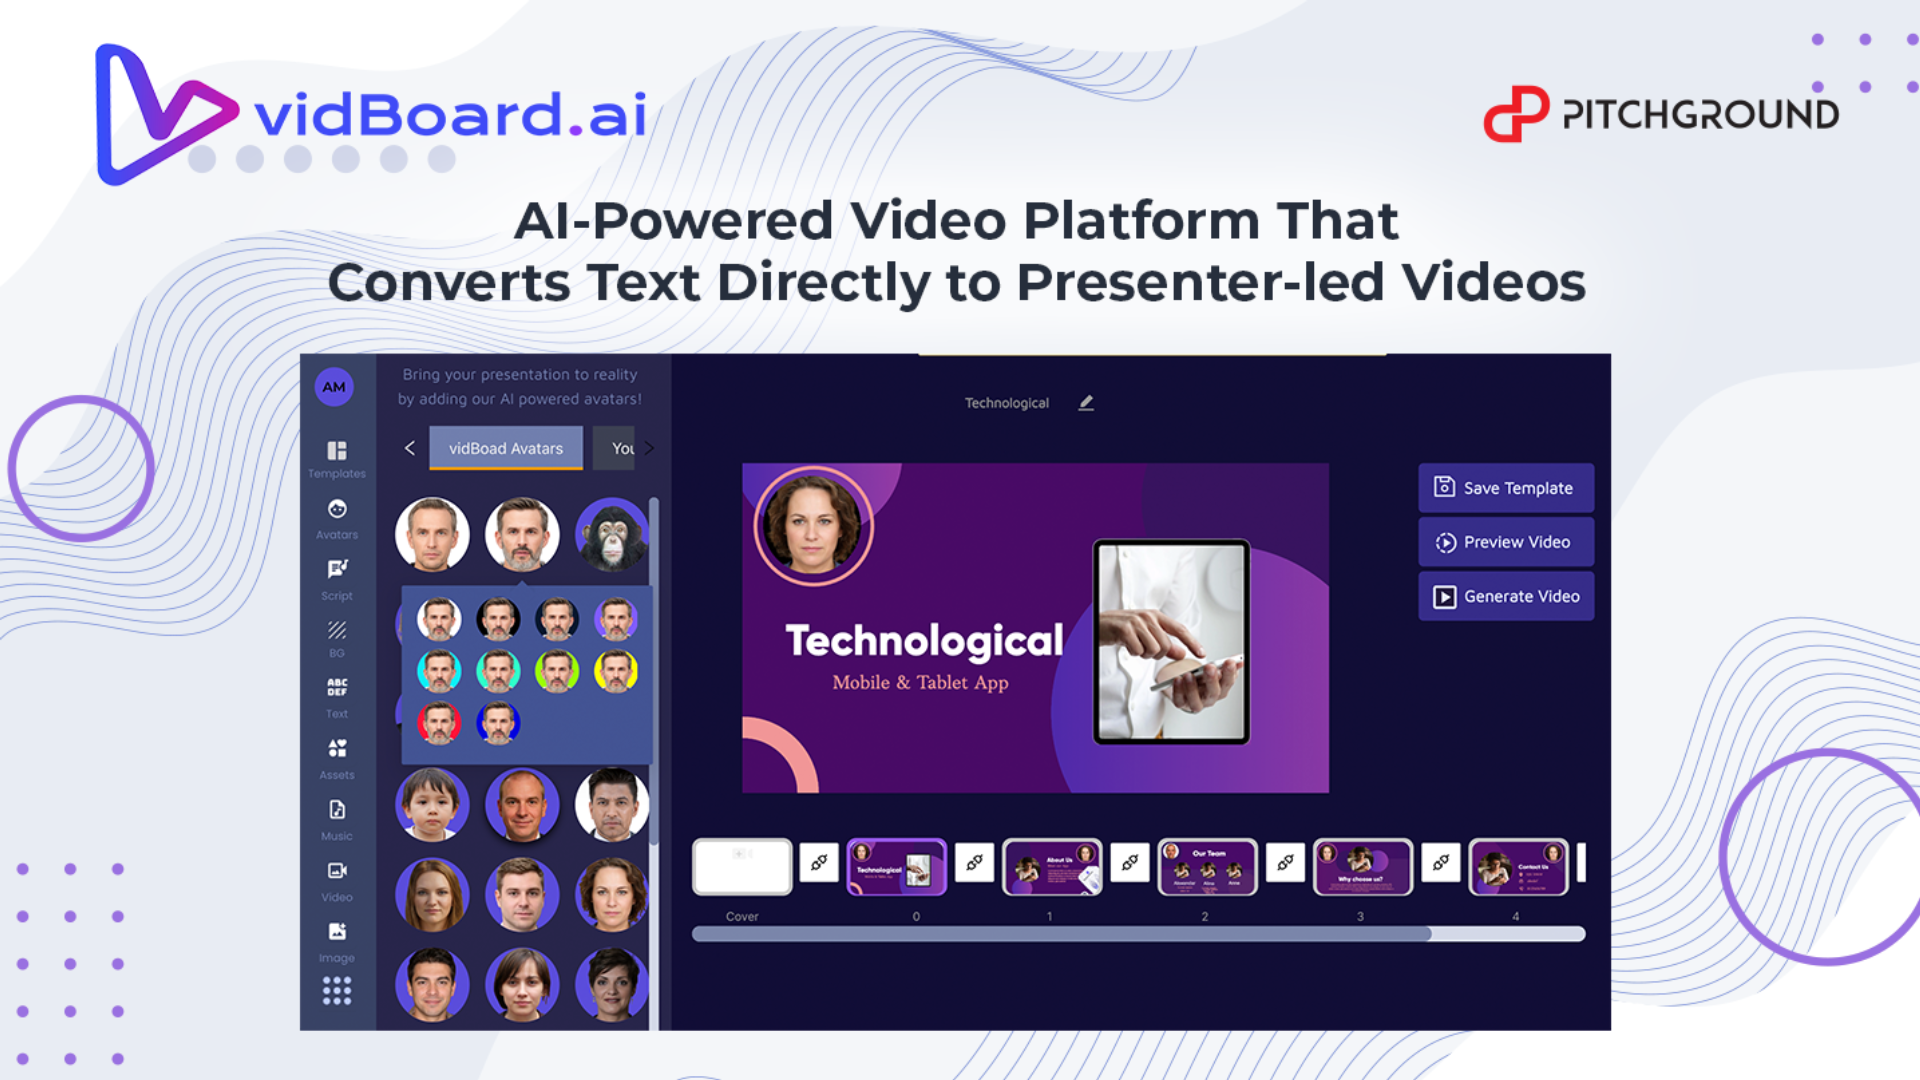 Lifetime Deal to vidBoard.ai: Plan A for $69